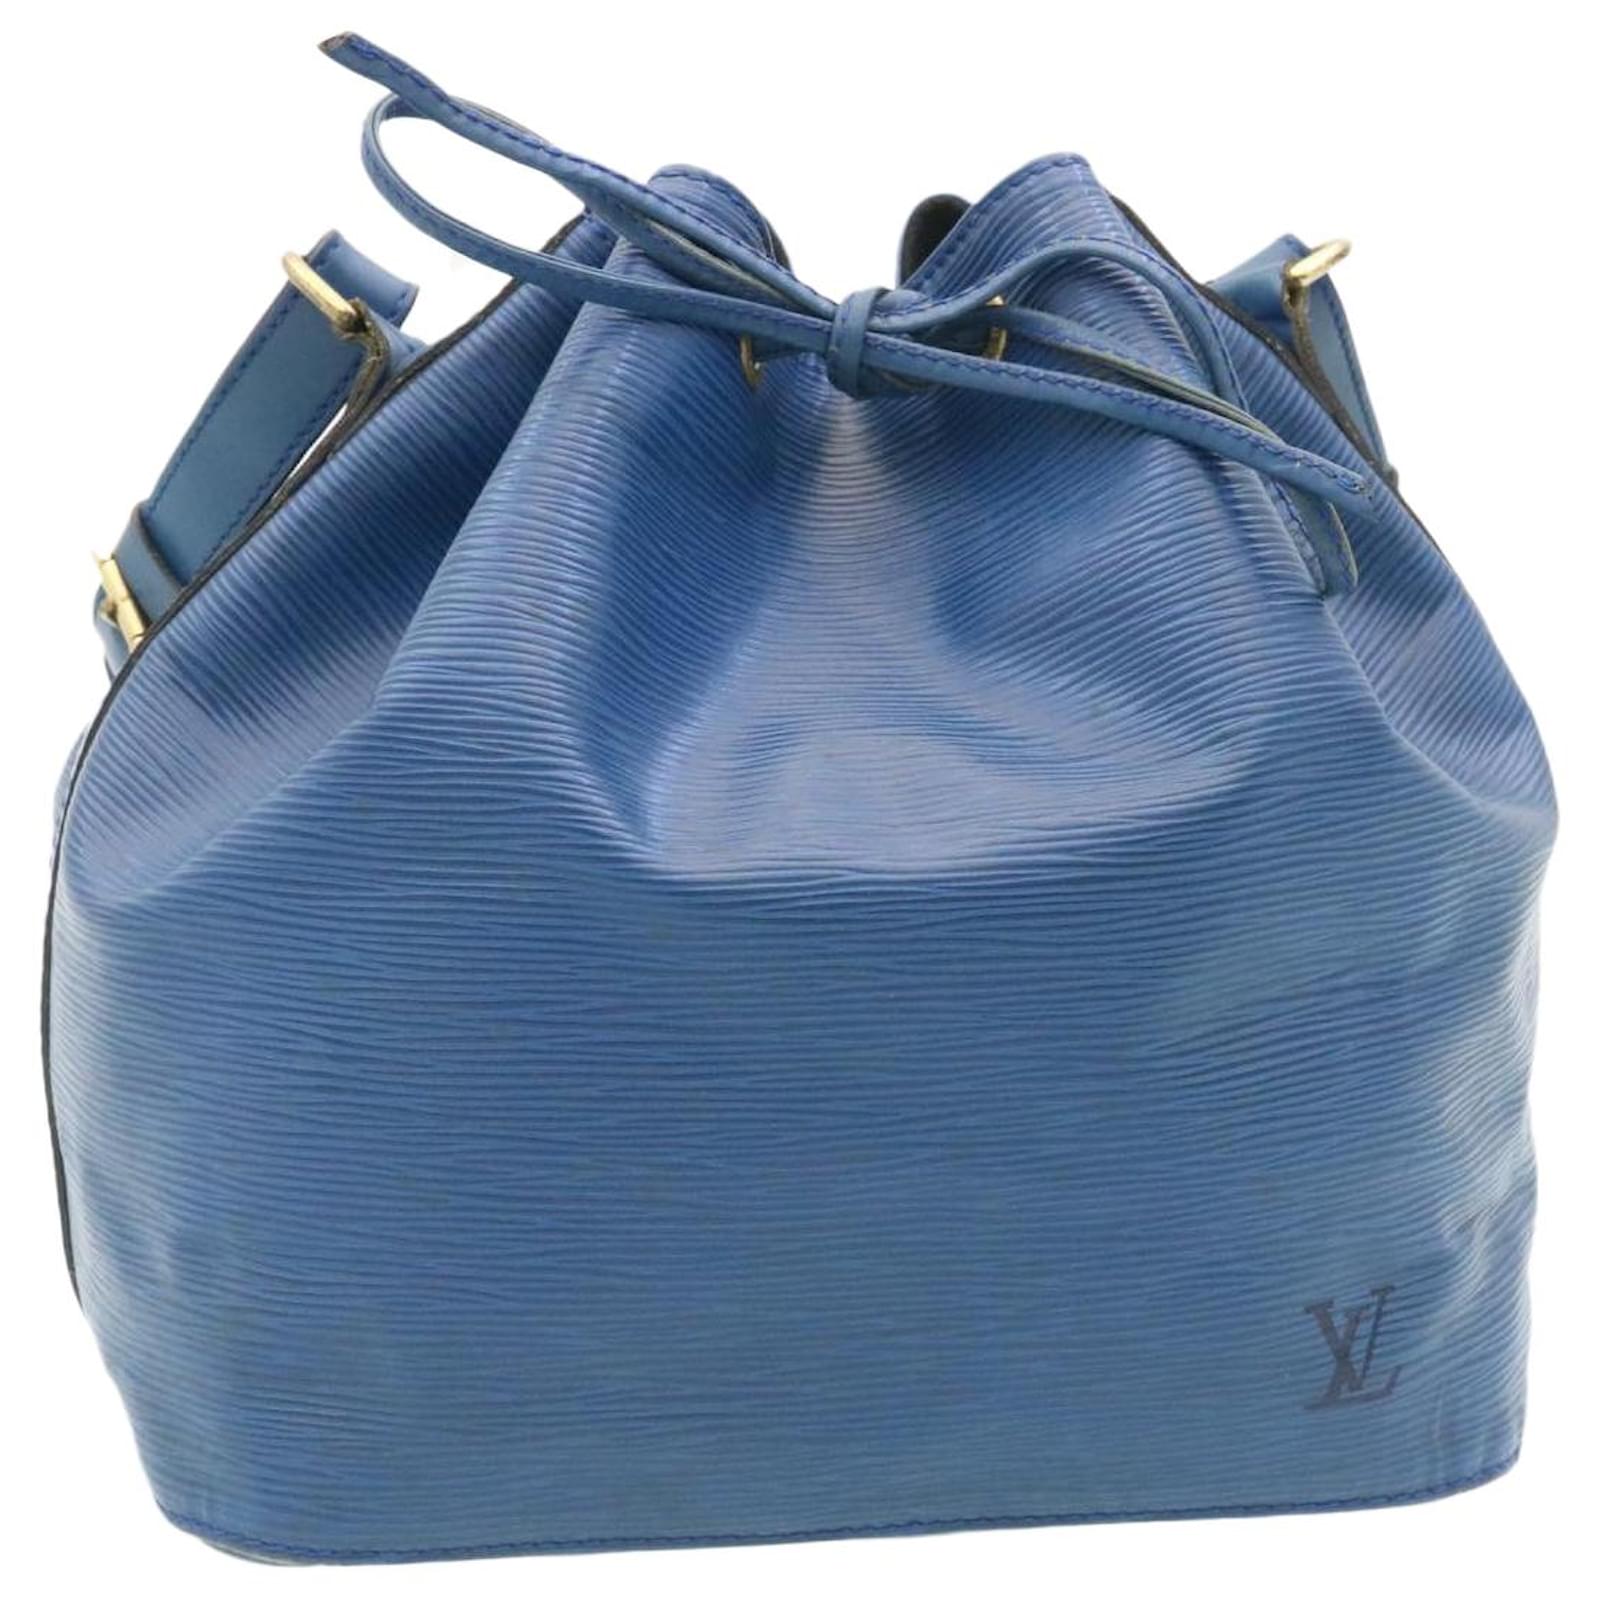 Louis Vuitton Noe Tricolor GM Bucket Bag, in red, blue and green